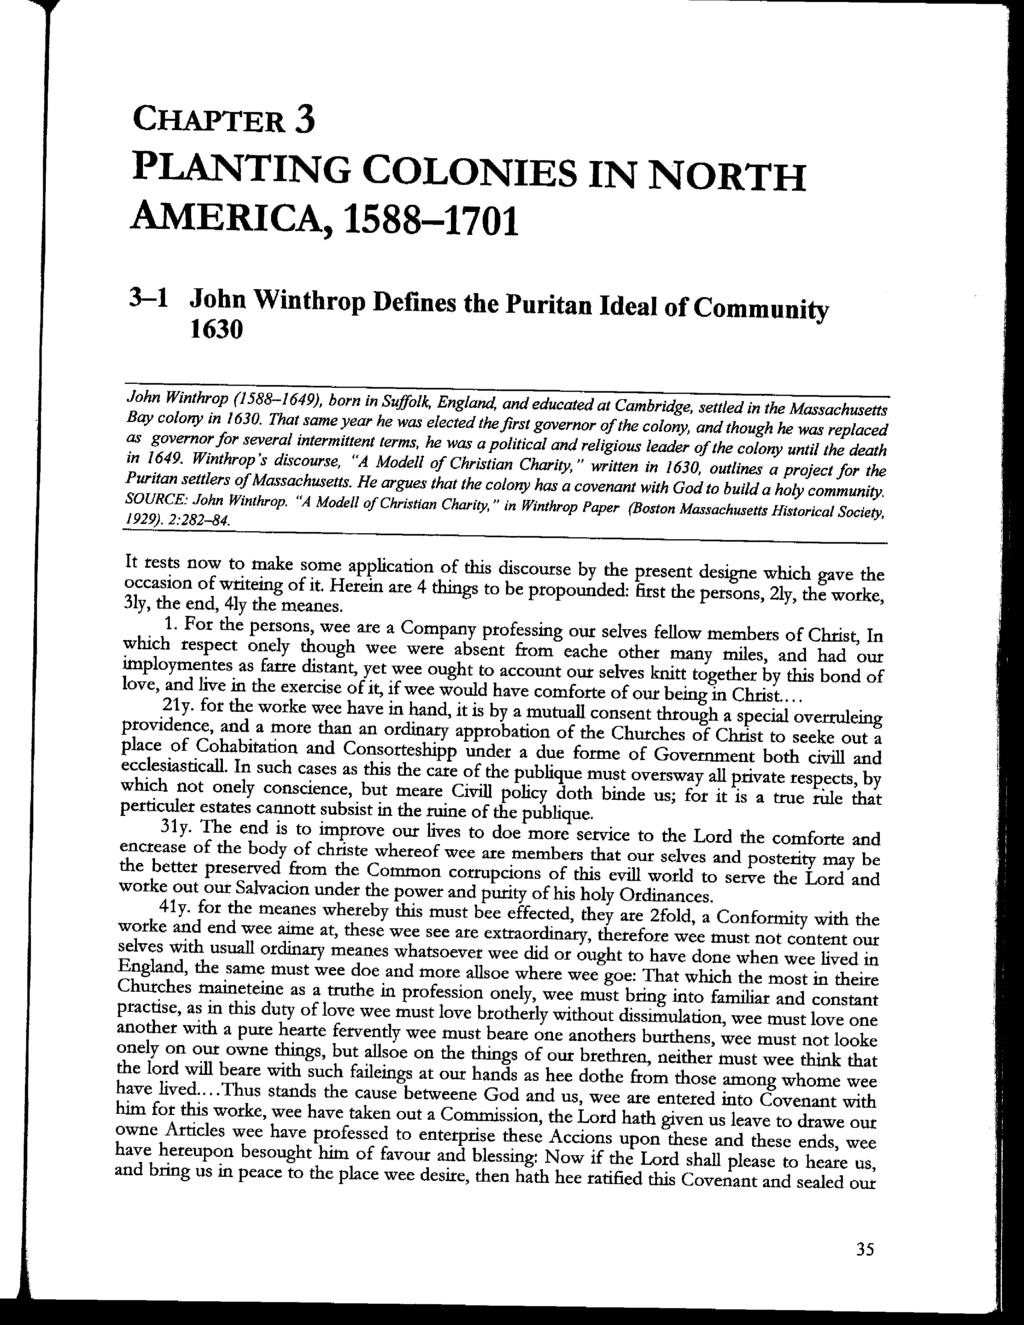 T CHAPTERS PLANTING COLONIES IN NORTH AMERICA, 1588-1701 3-1 John Winthrop Defines the Puritan Ideal of Community 1630 John Winthrop (1588-1649), born in Suffolk, England, and educated at Cambridge,